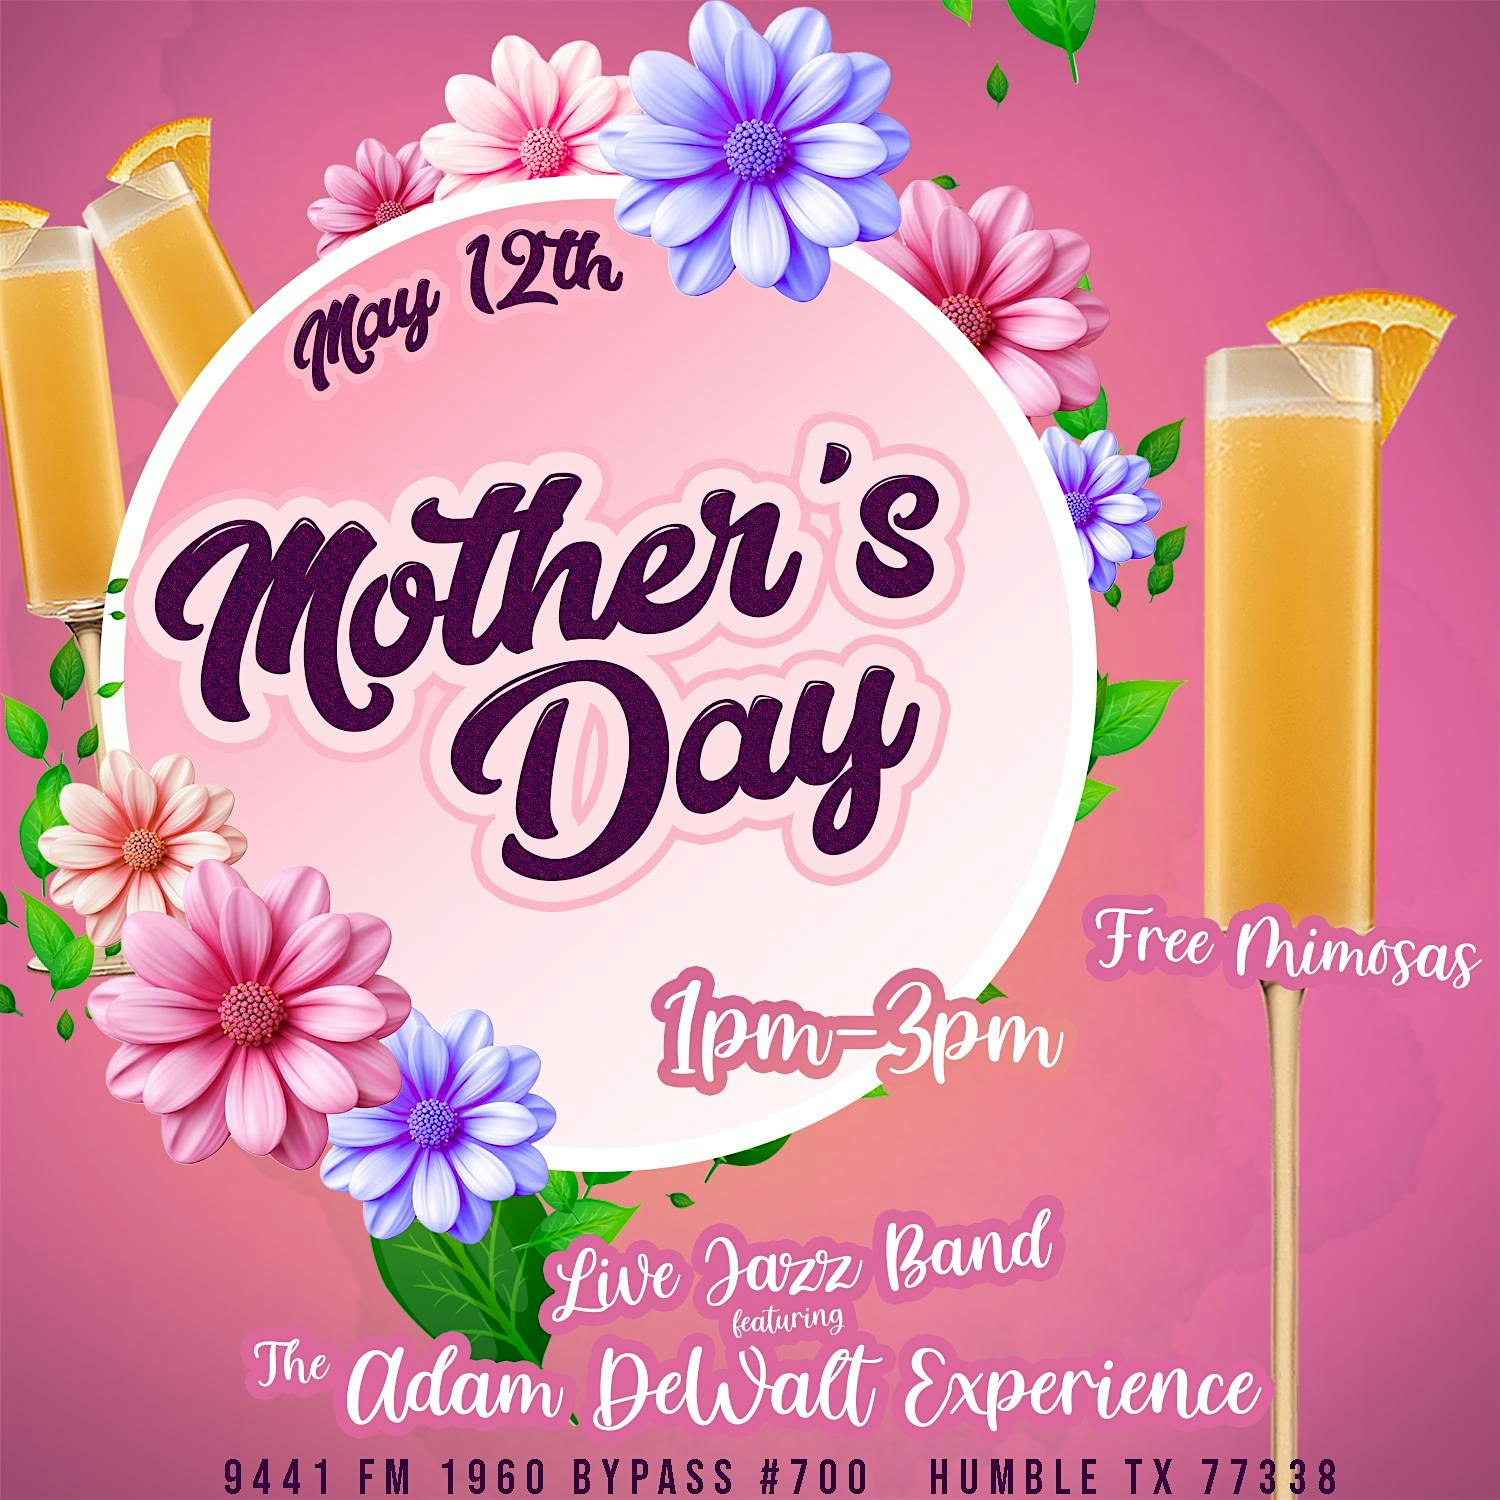 Mother's Day Jazz Hour with FREE MIMOSAS